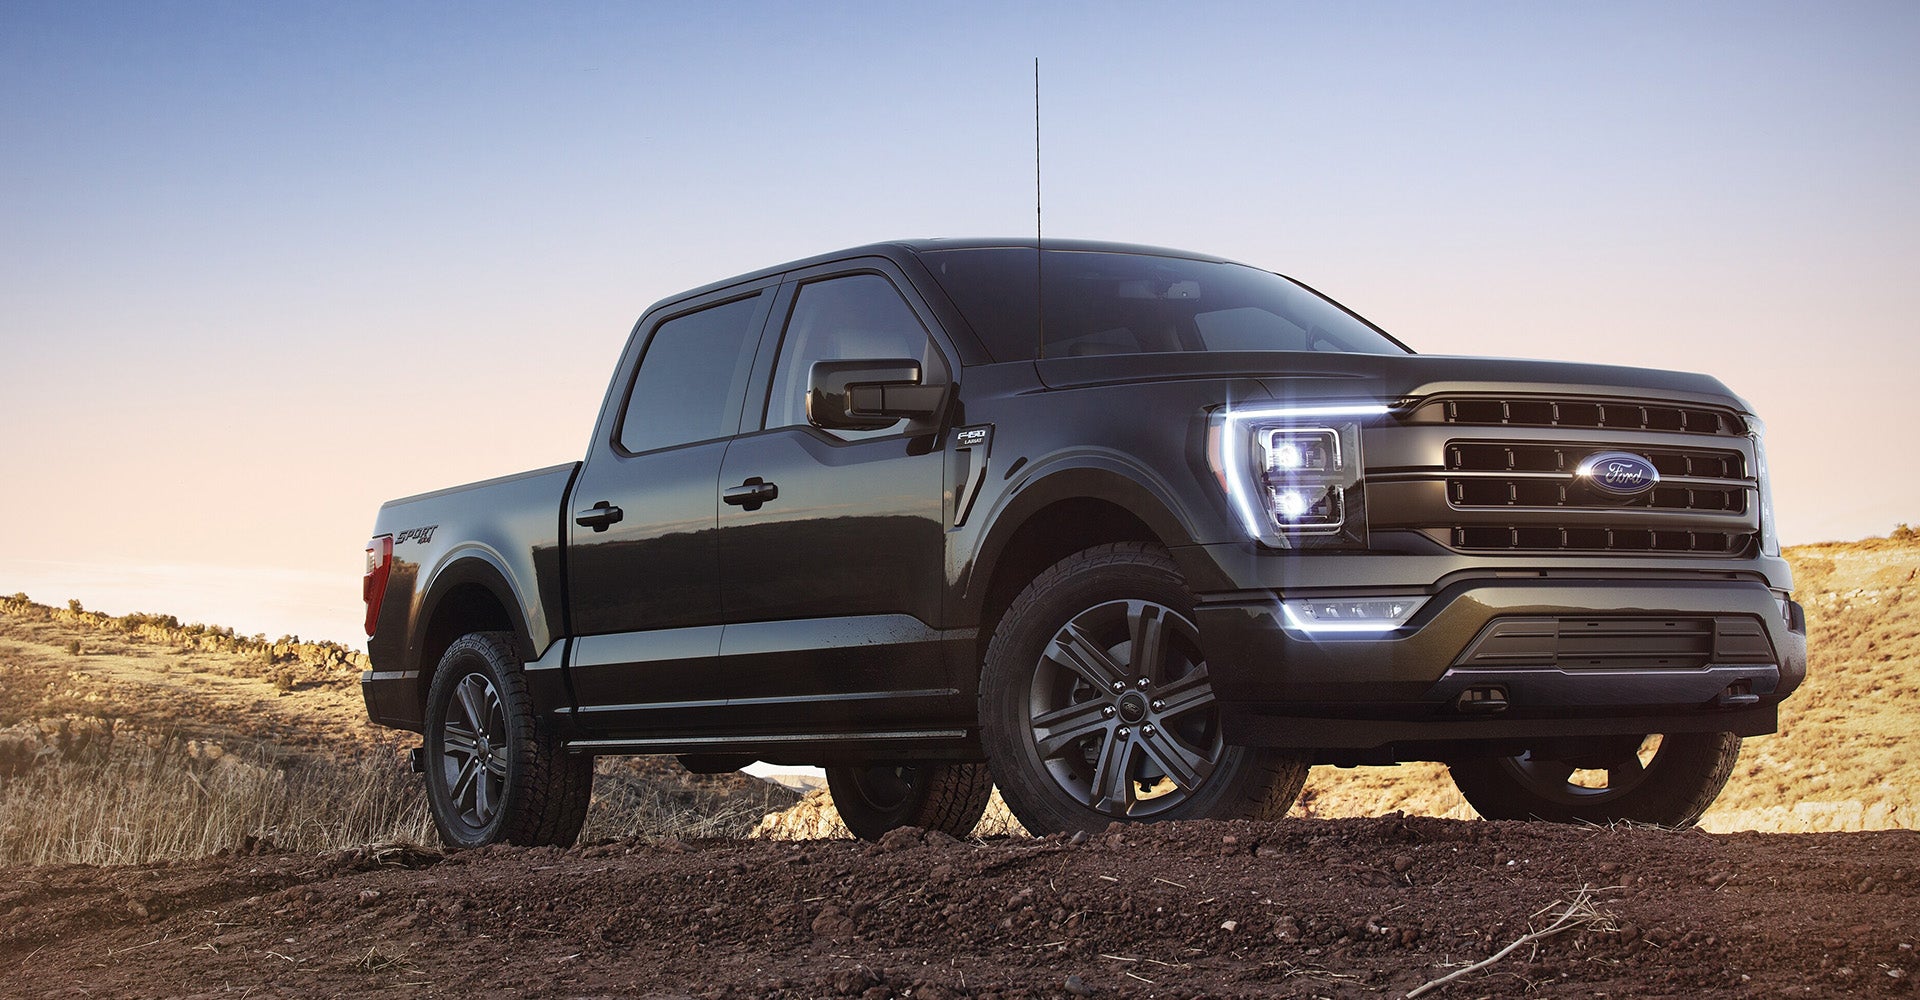 Ford F-150 Lease Deals